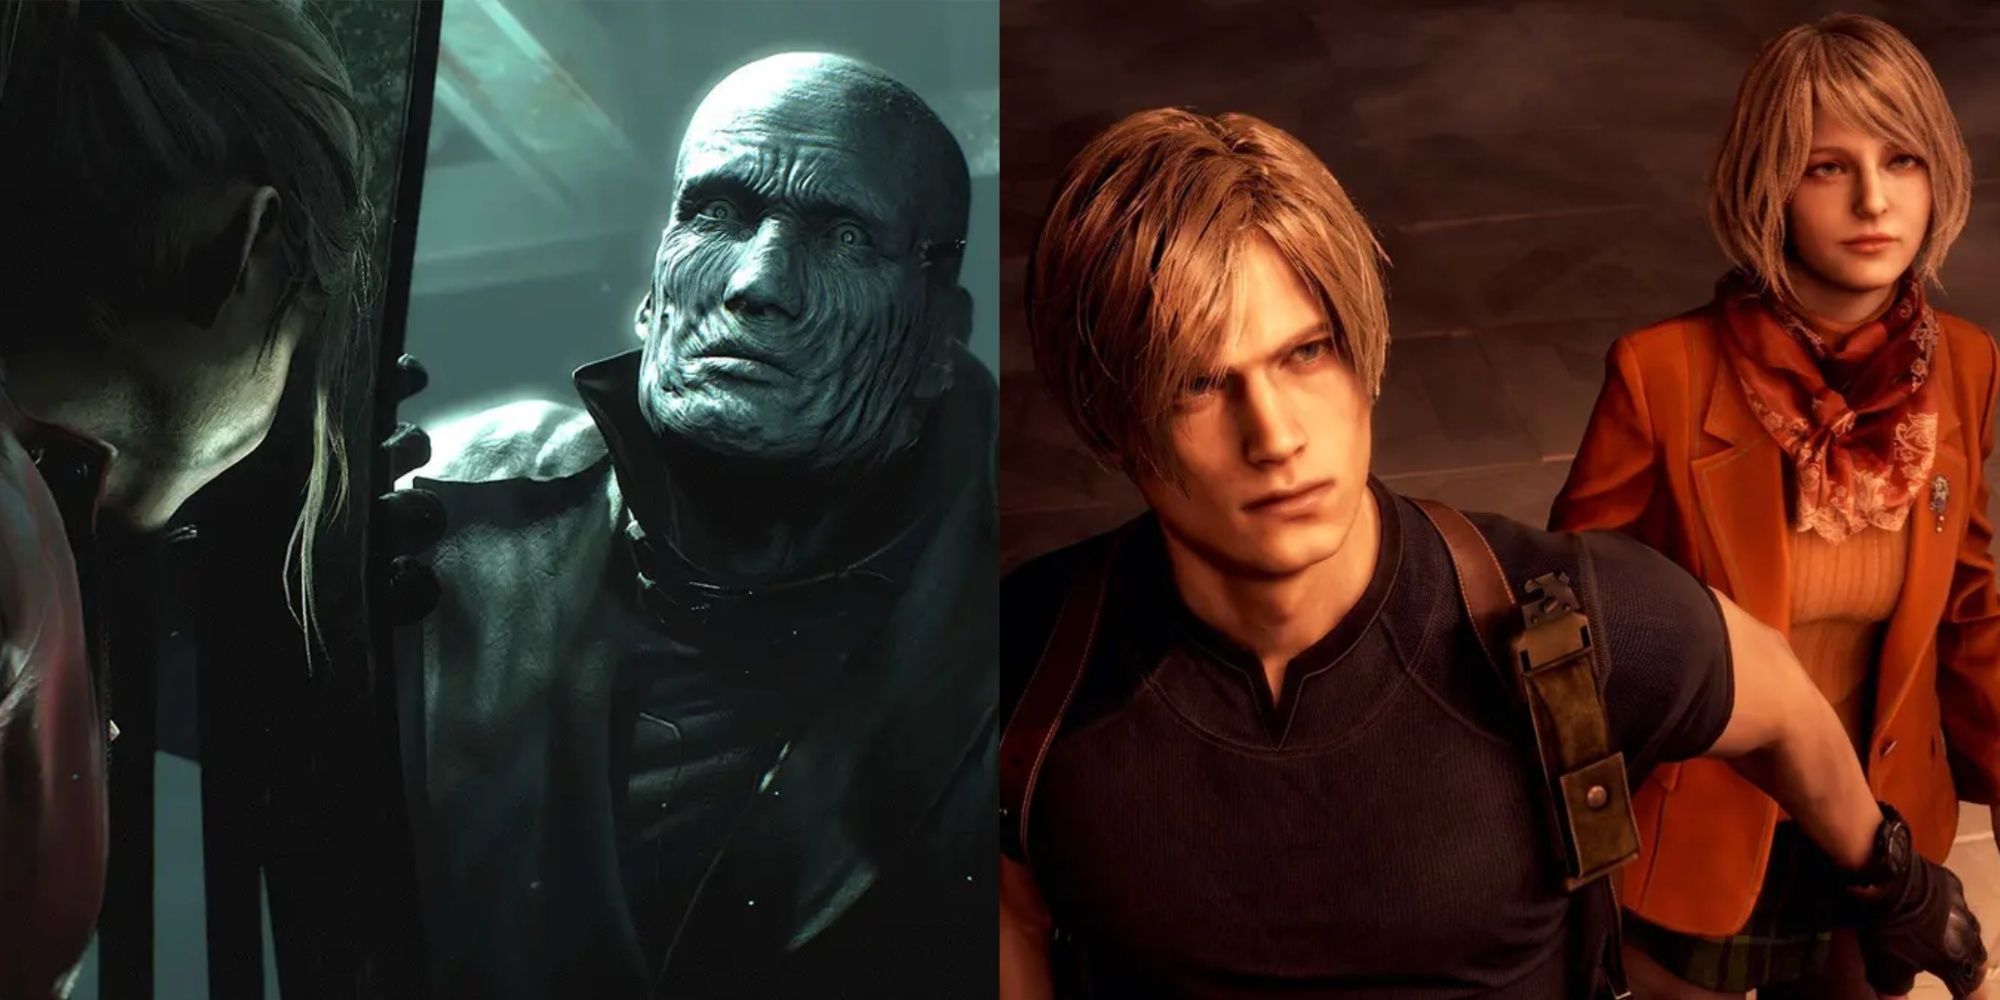 Why Resident Evil Is Called Biohazard Featured Split Image Of Mr.X And Leon